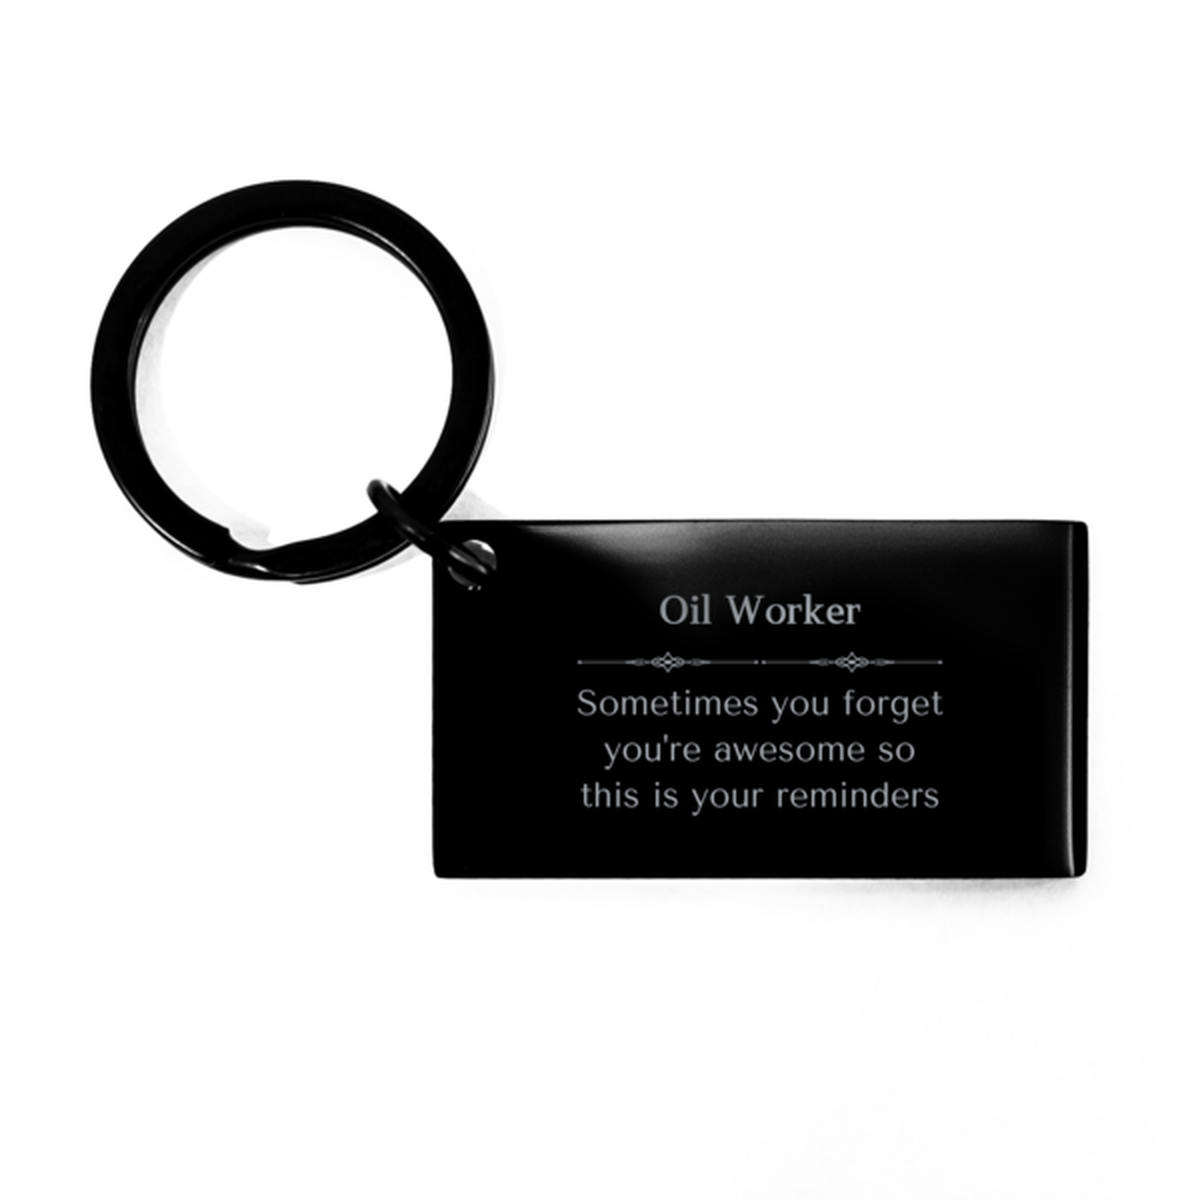 Sentimental Oil Worker Keychain, Physician Assistant Sometimes you forget you're awesome so this is your reminders, Graduation Christmas Birthday Gifts for Oil Worker, Men, Women, Coworkers